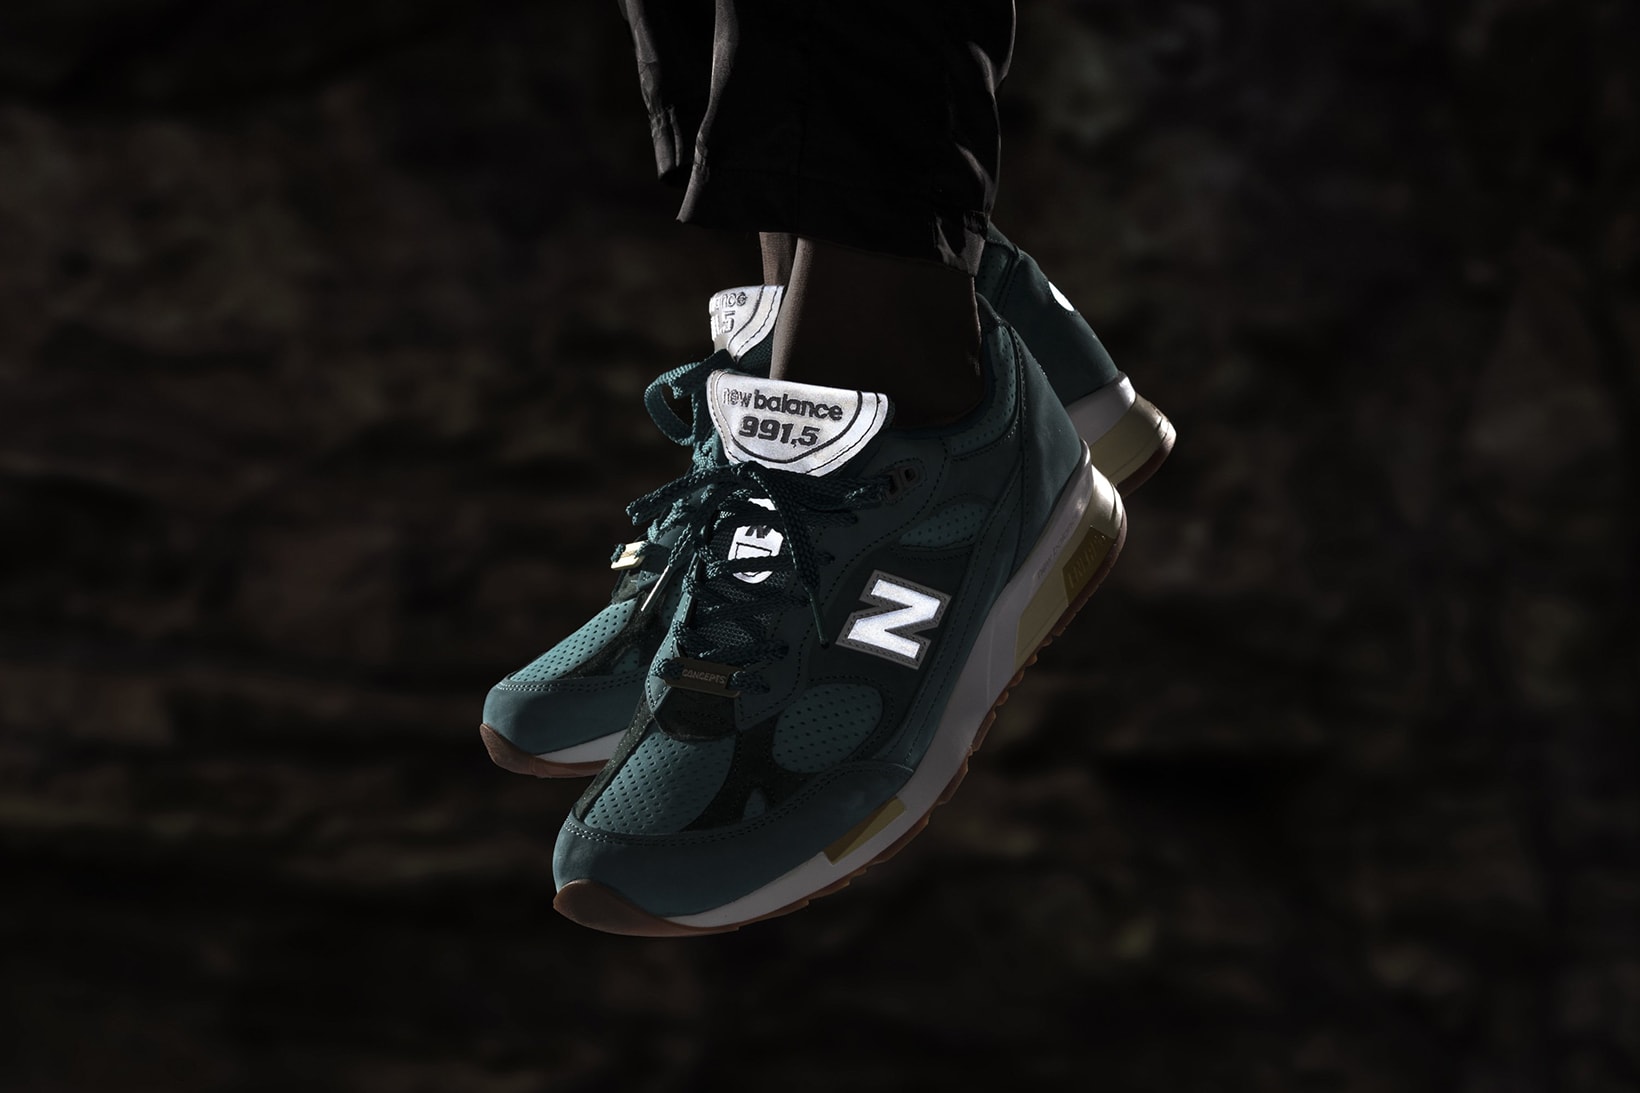 Concepts New Balance Made in UK 991 5 Lake Havasu Collaboration 2018 January 19 Release Date Info Sneakers Shoes Footwear